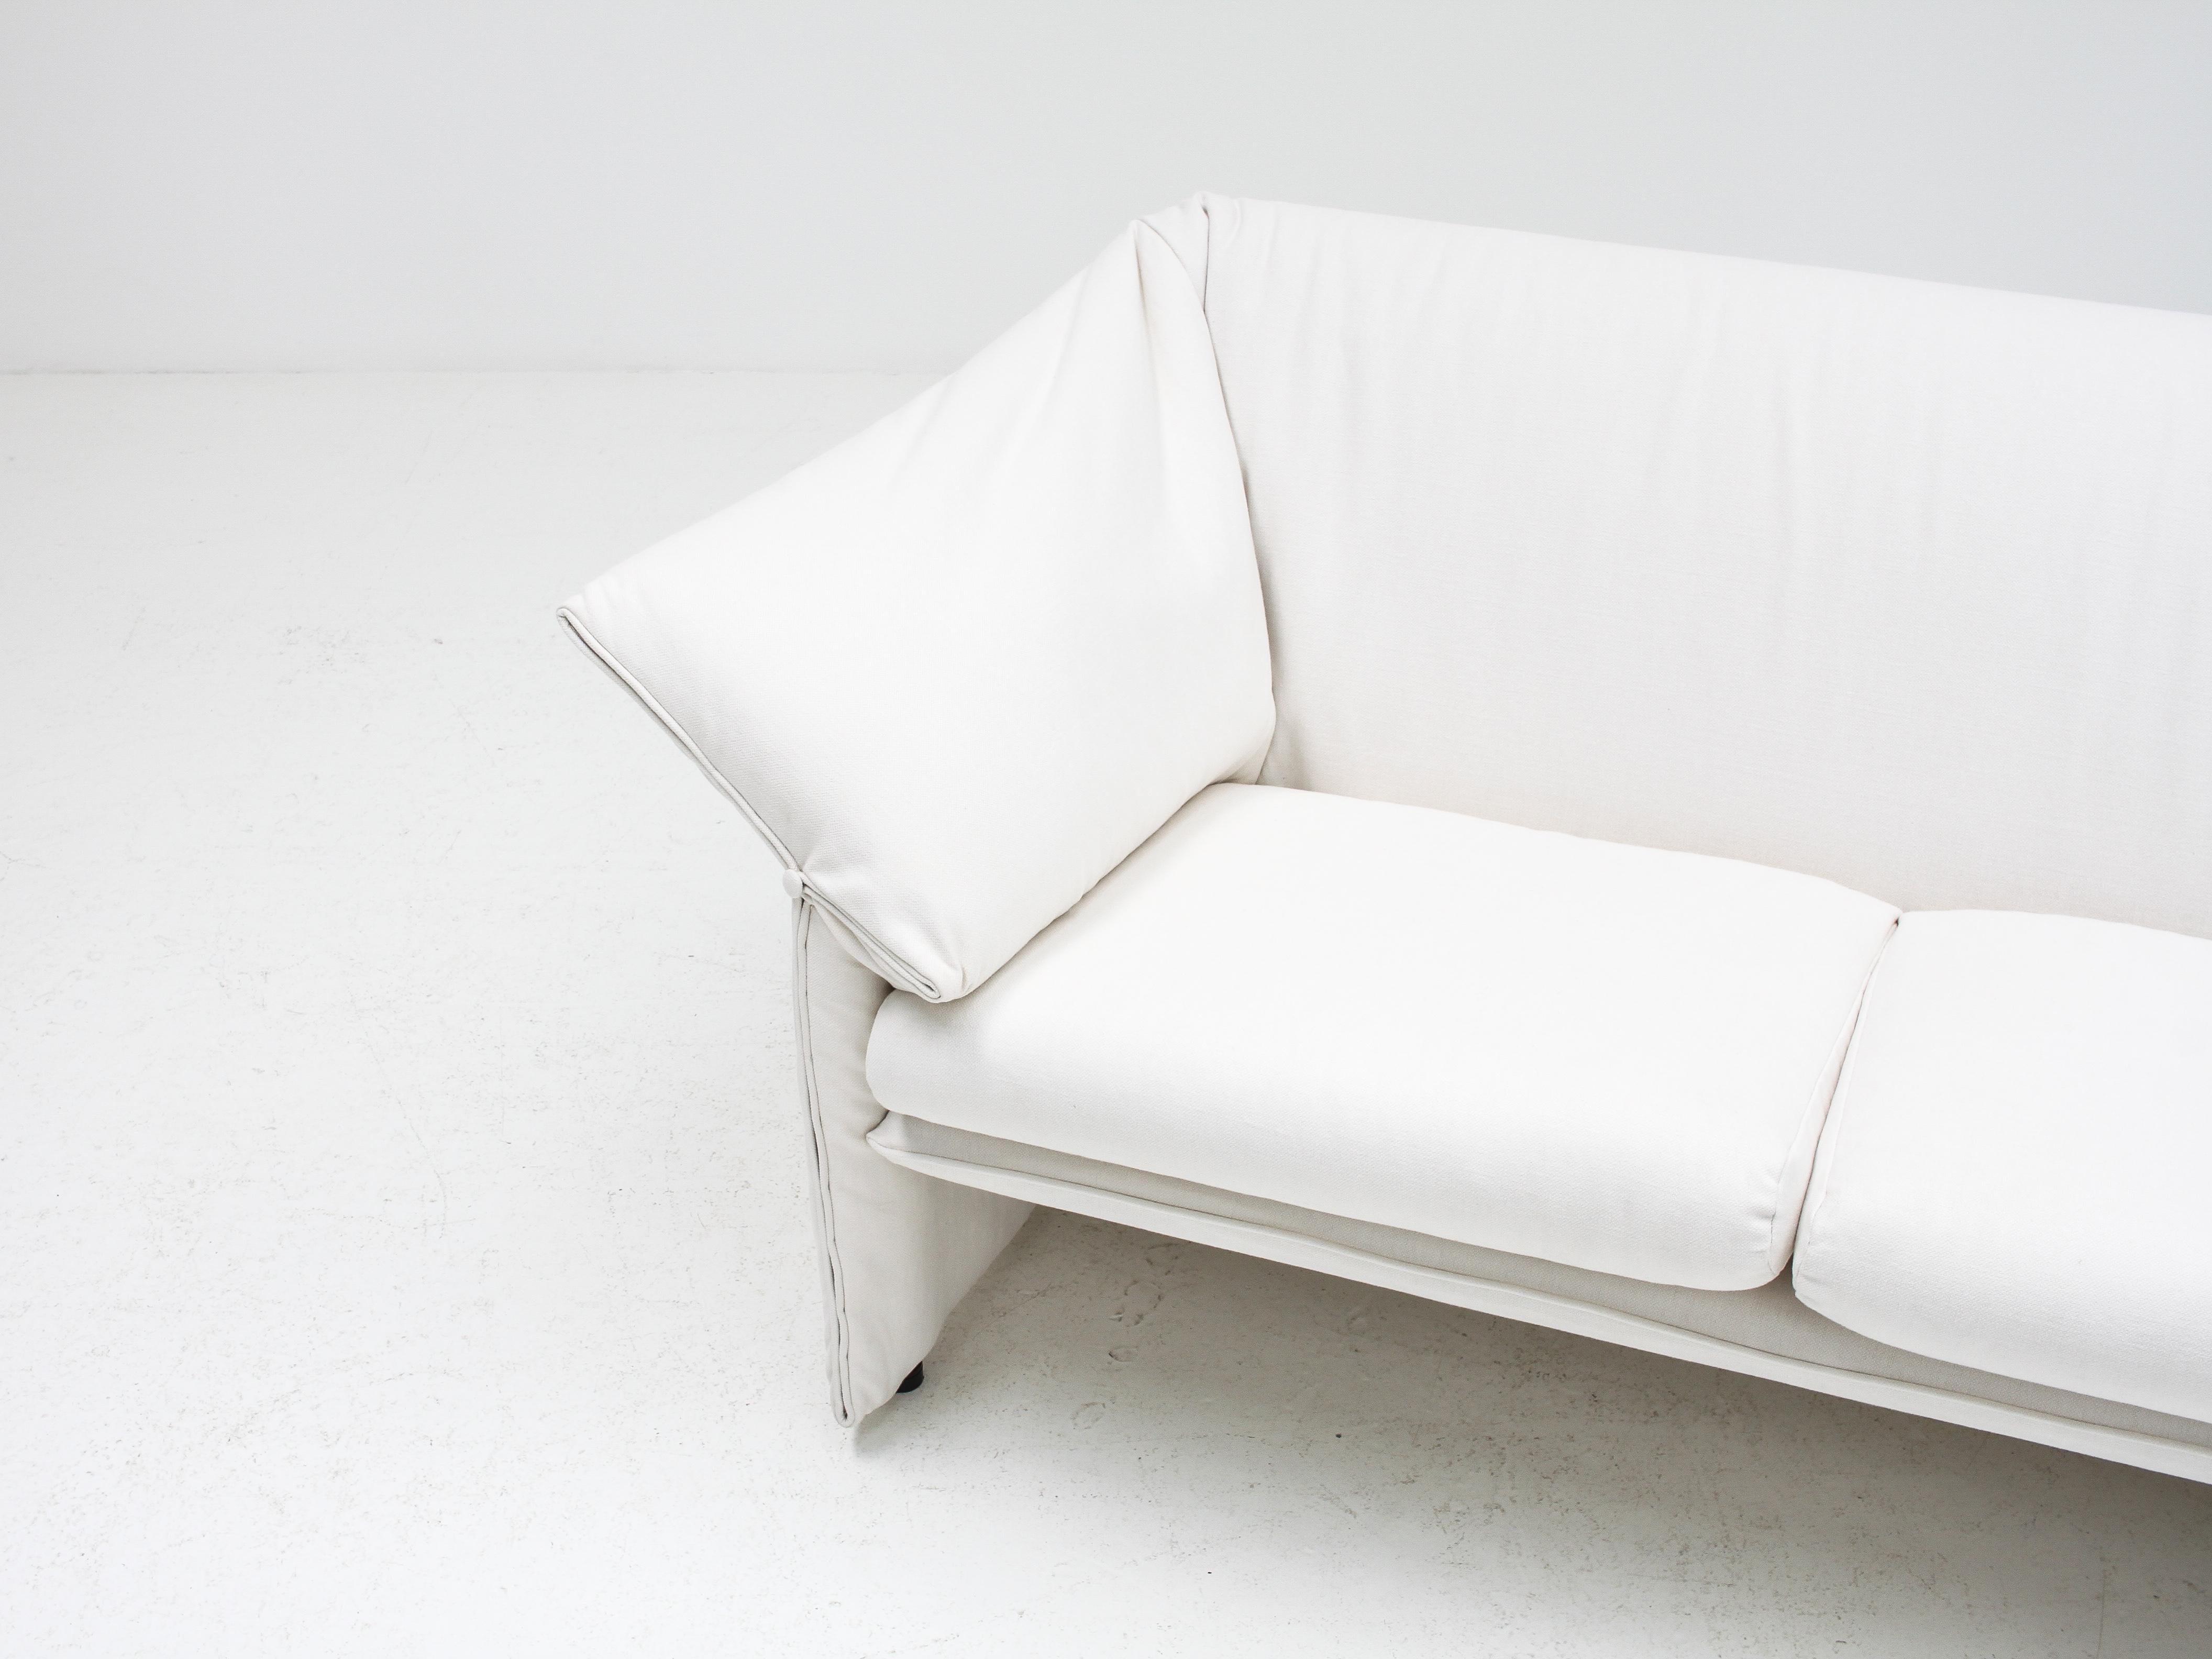  'Le Stelle' Loveseat Sofa by Mario Bellini for B&B Italia, 1974, Reupholstered 2